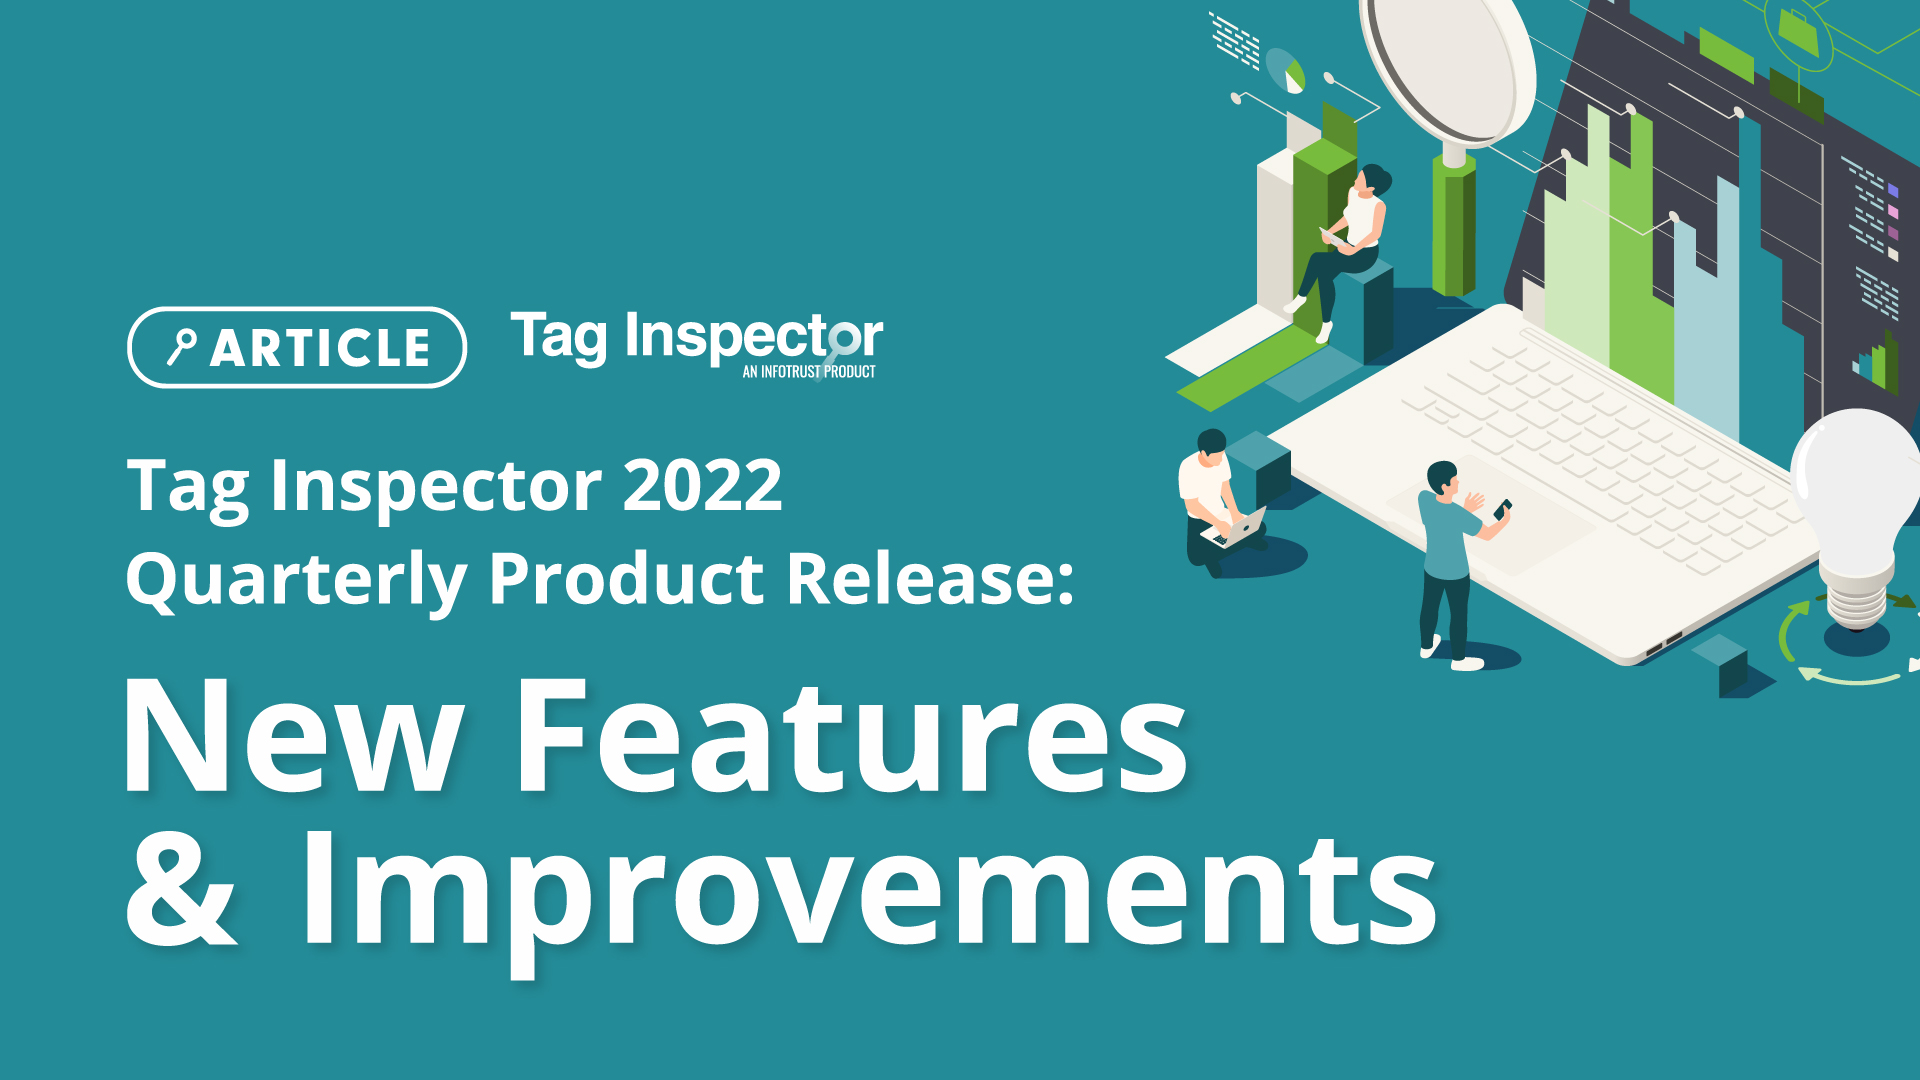 Tag Inspector 2022 Quarterly Product Release: New Features & Improvements